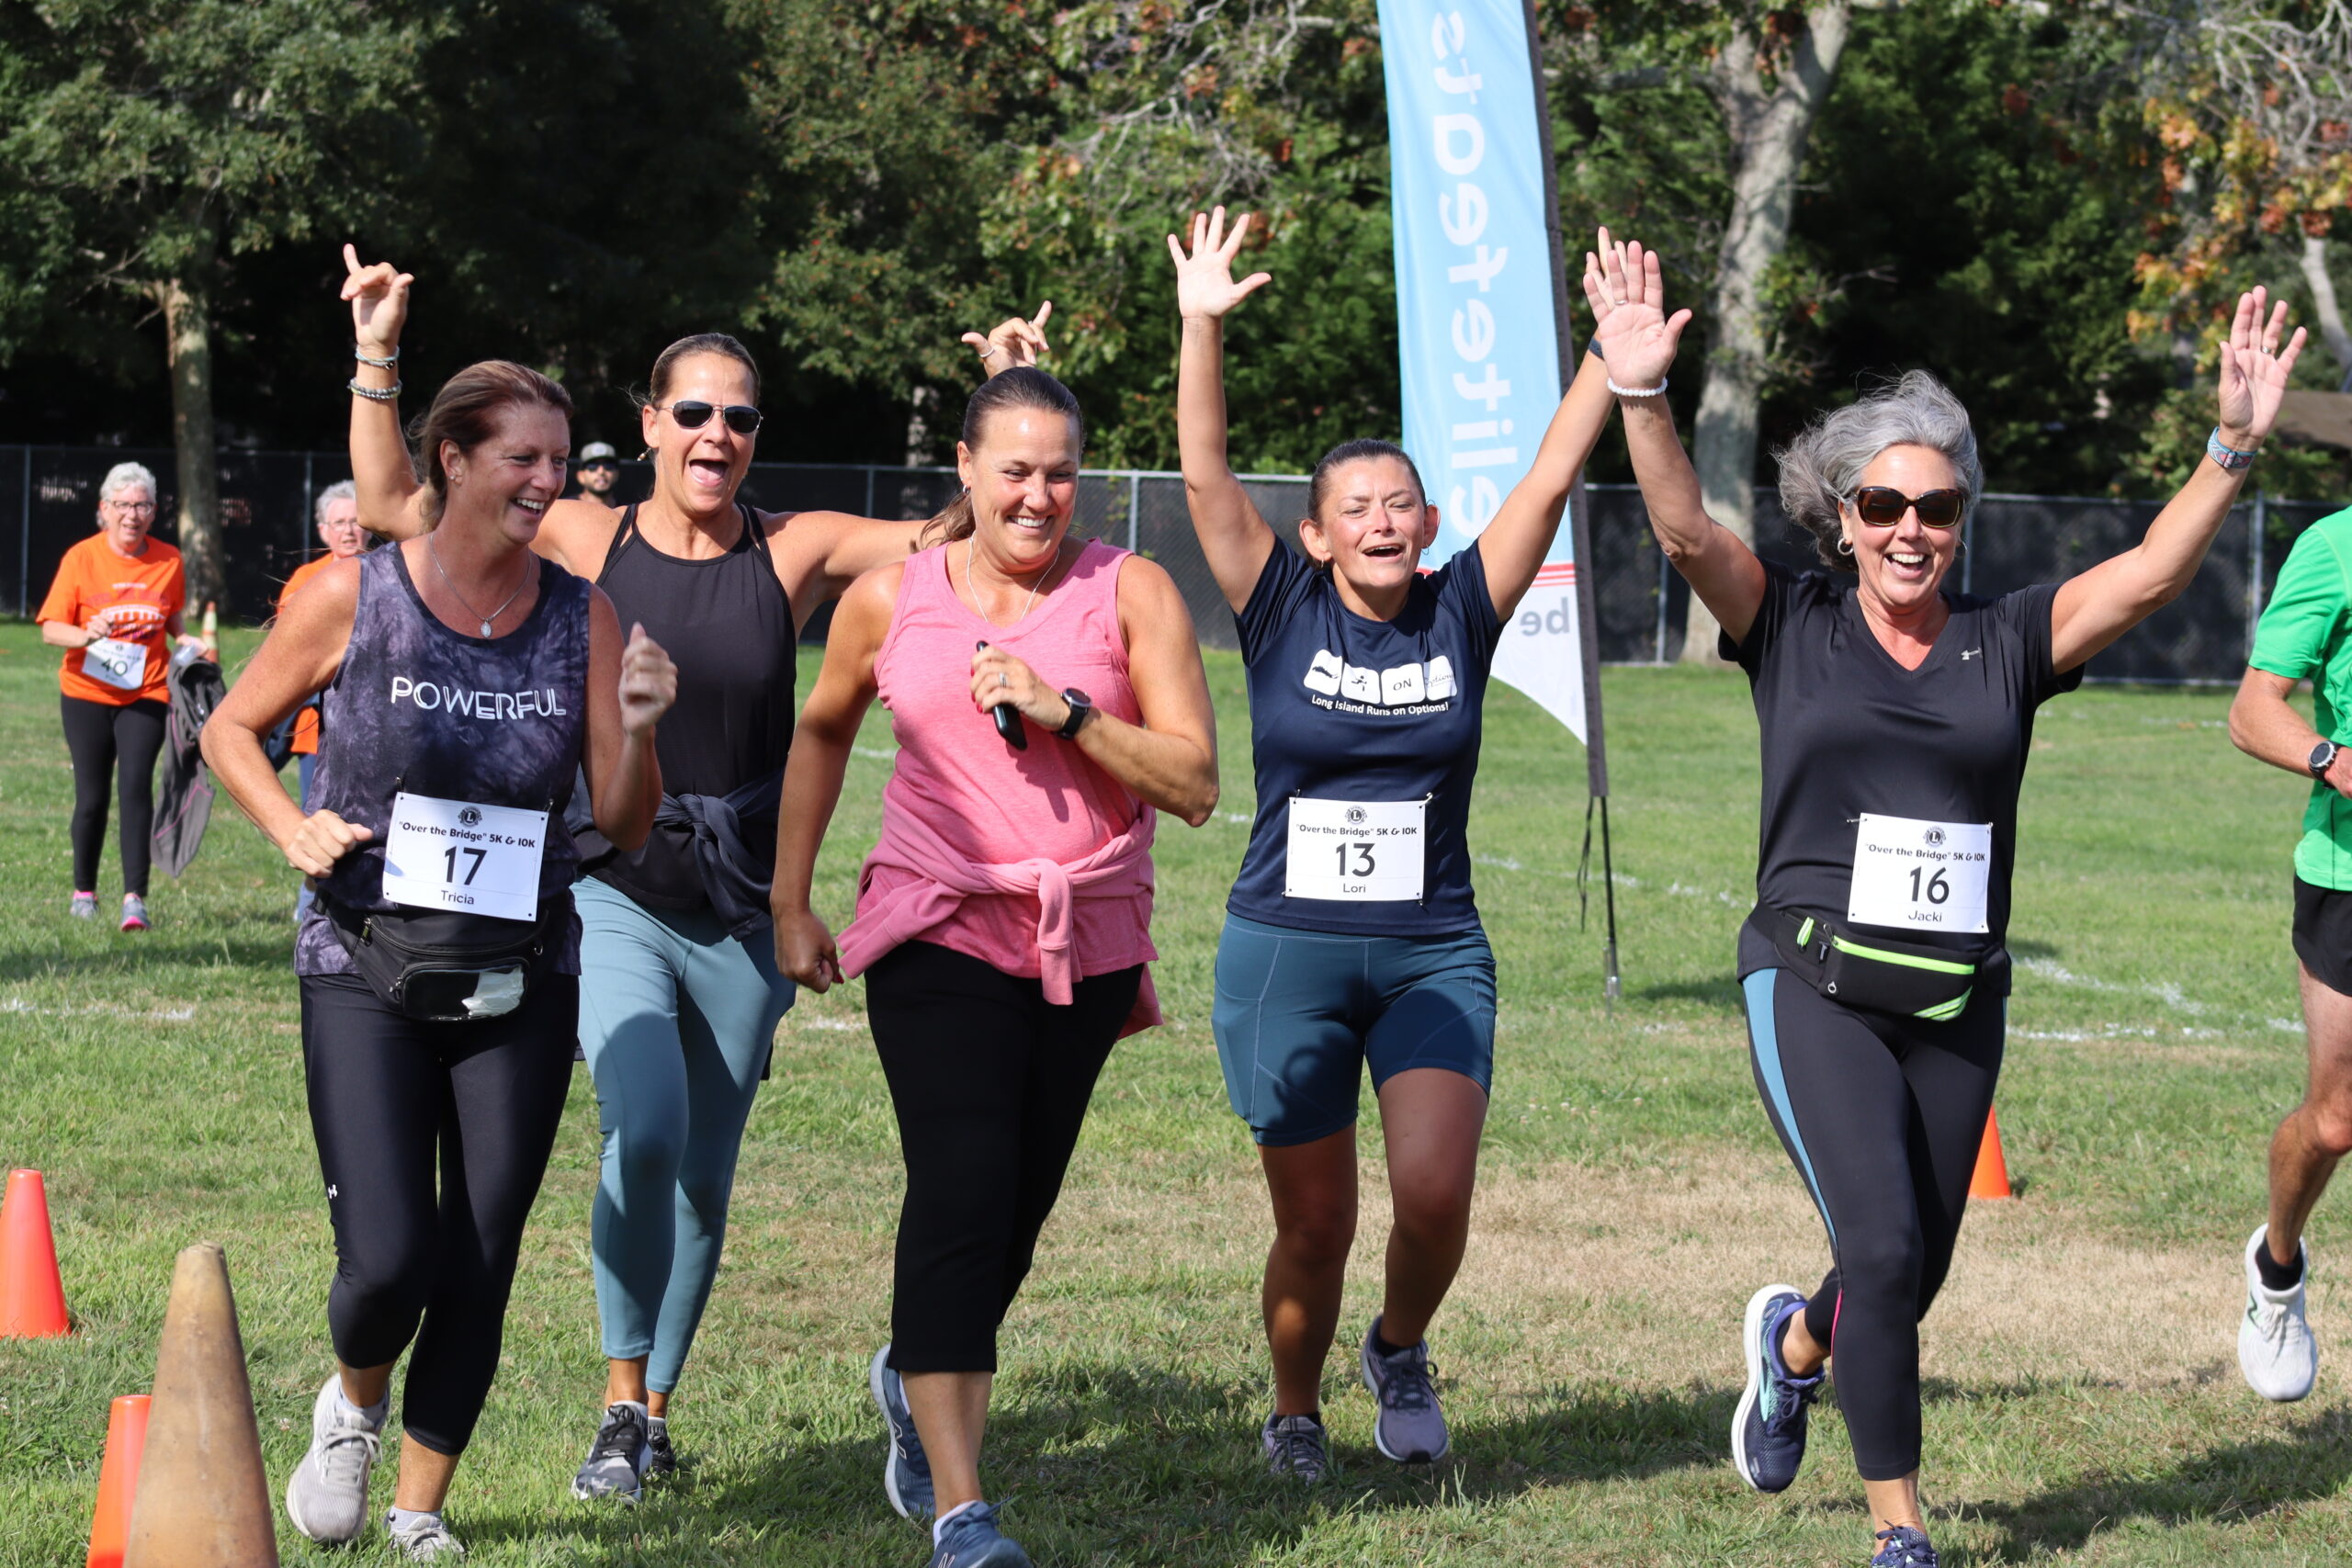 A group of friends raises their hands in triumph after crossing the finish line in the 11th annual Over the Bridge 5K and 10K run in Hampton Bays on Saturday. CAILIN RILEY